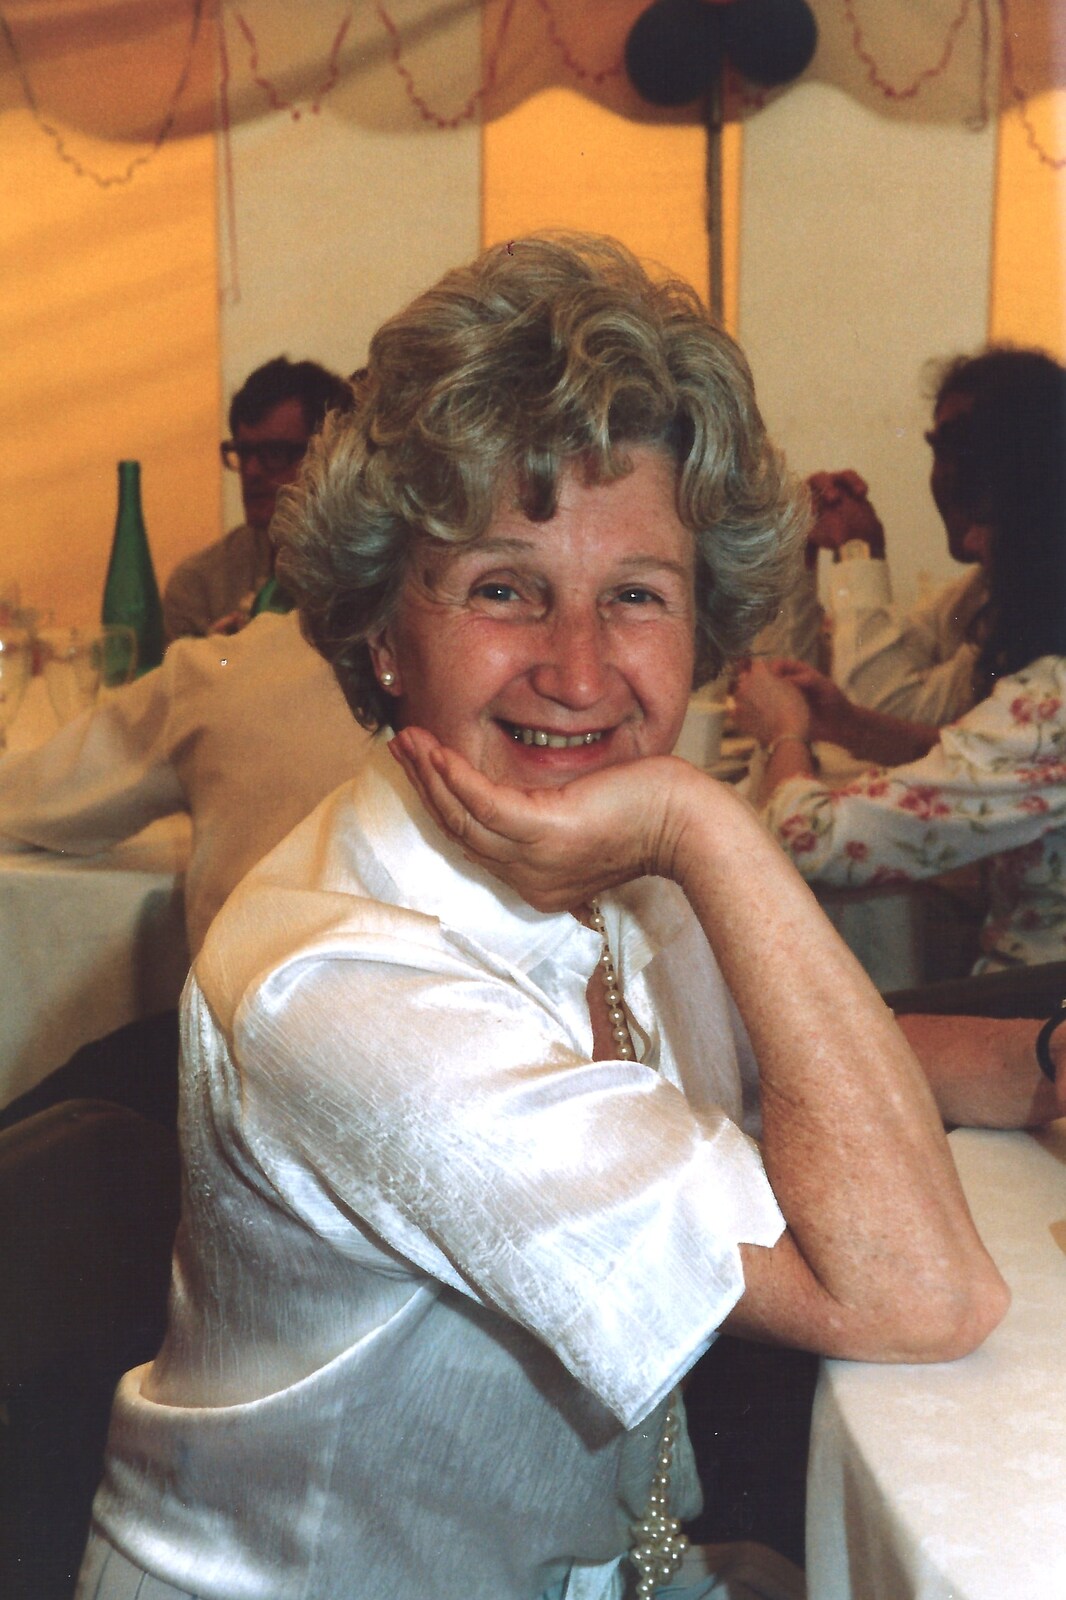 Grandmother from Mother and Mike's Wedding Reception, Bransgore, Dorset - 20th August 1988